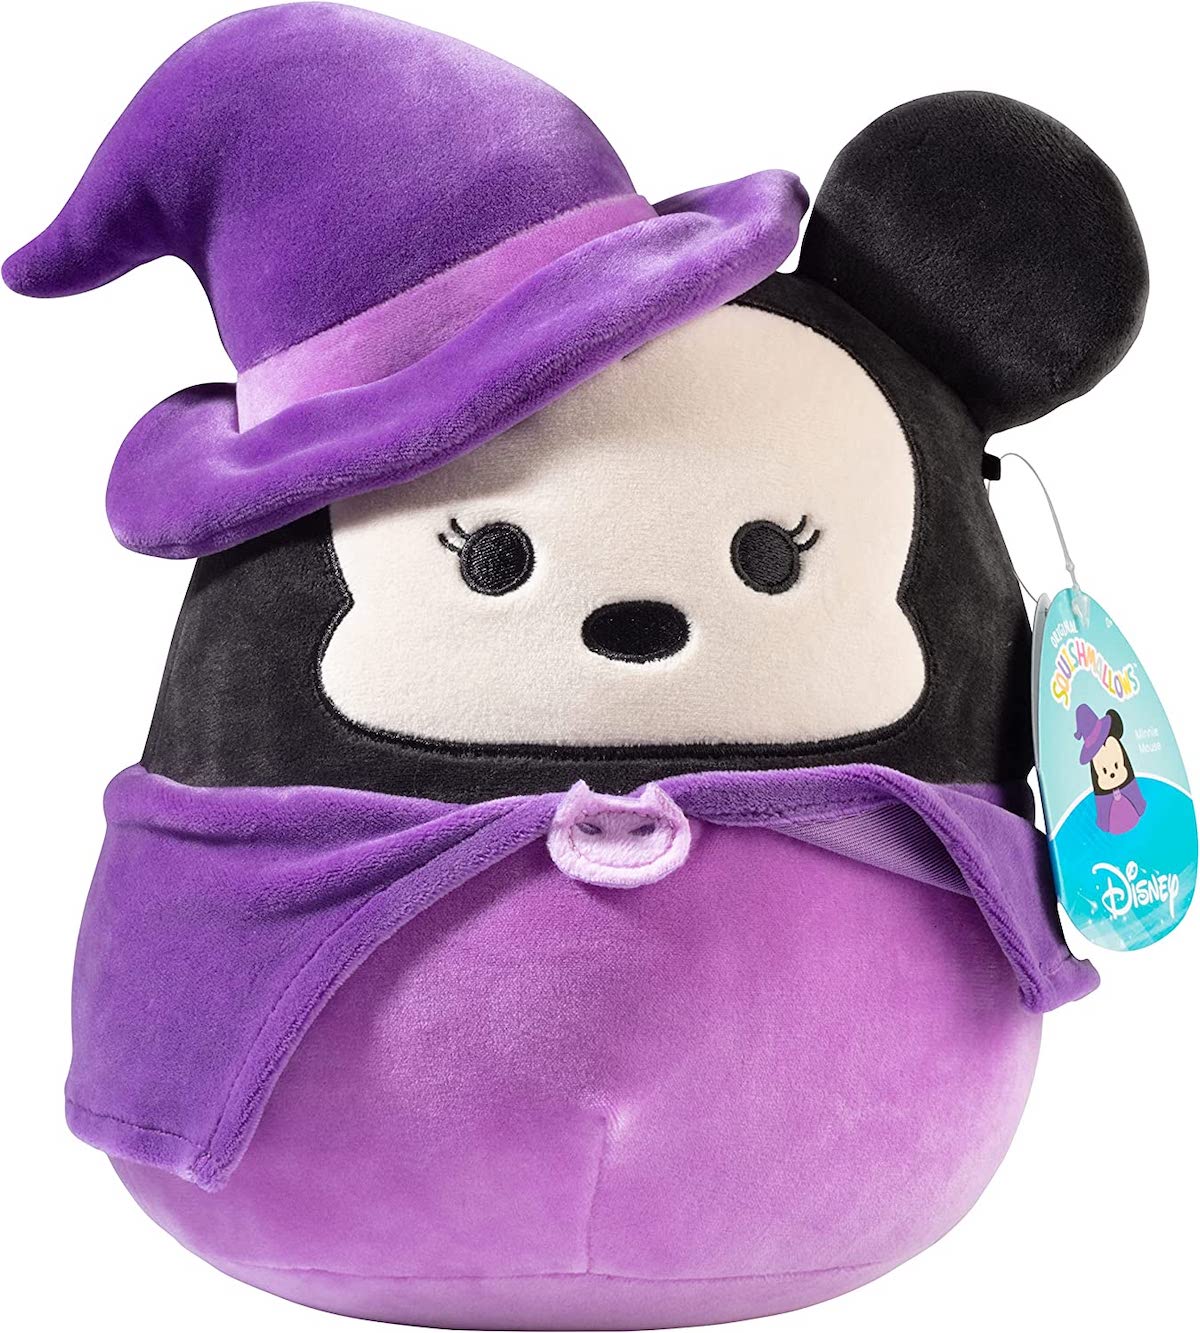 A Minnie Mouse Squishmallow in a purple witch's hat and cloak